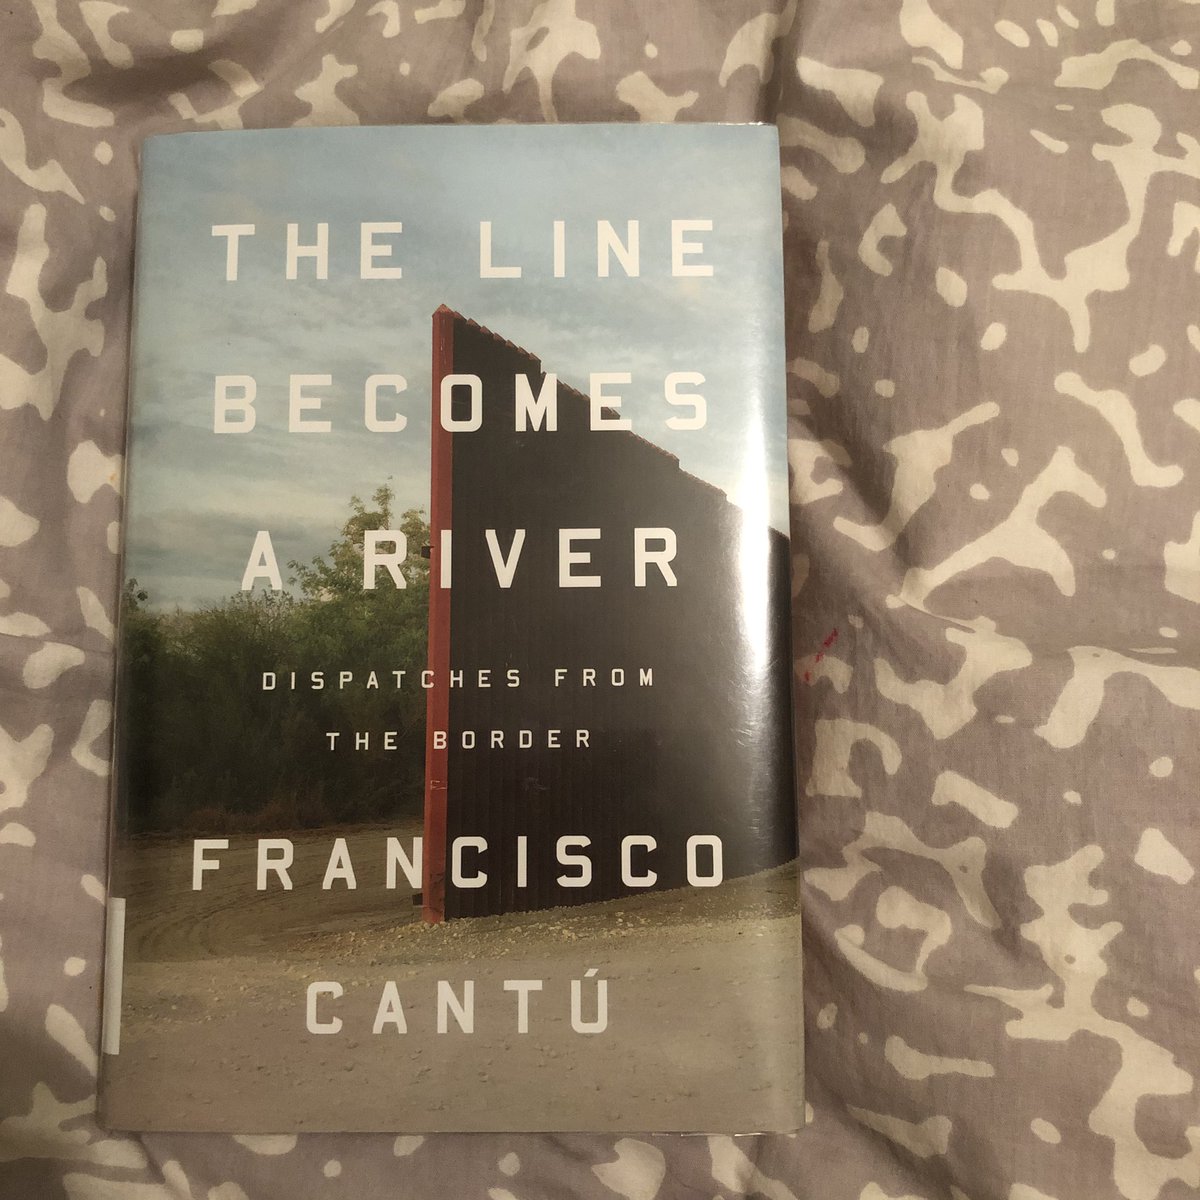 16. The Line Becomes A River: Dispaches From the Border - Francisco Cantú (read this bc of work and I honestly haven’t felt this conflicted about a book in a long, long time)